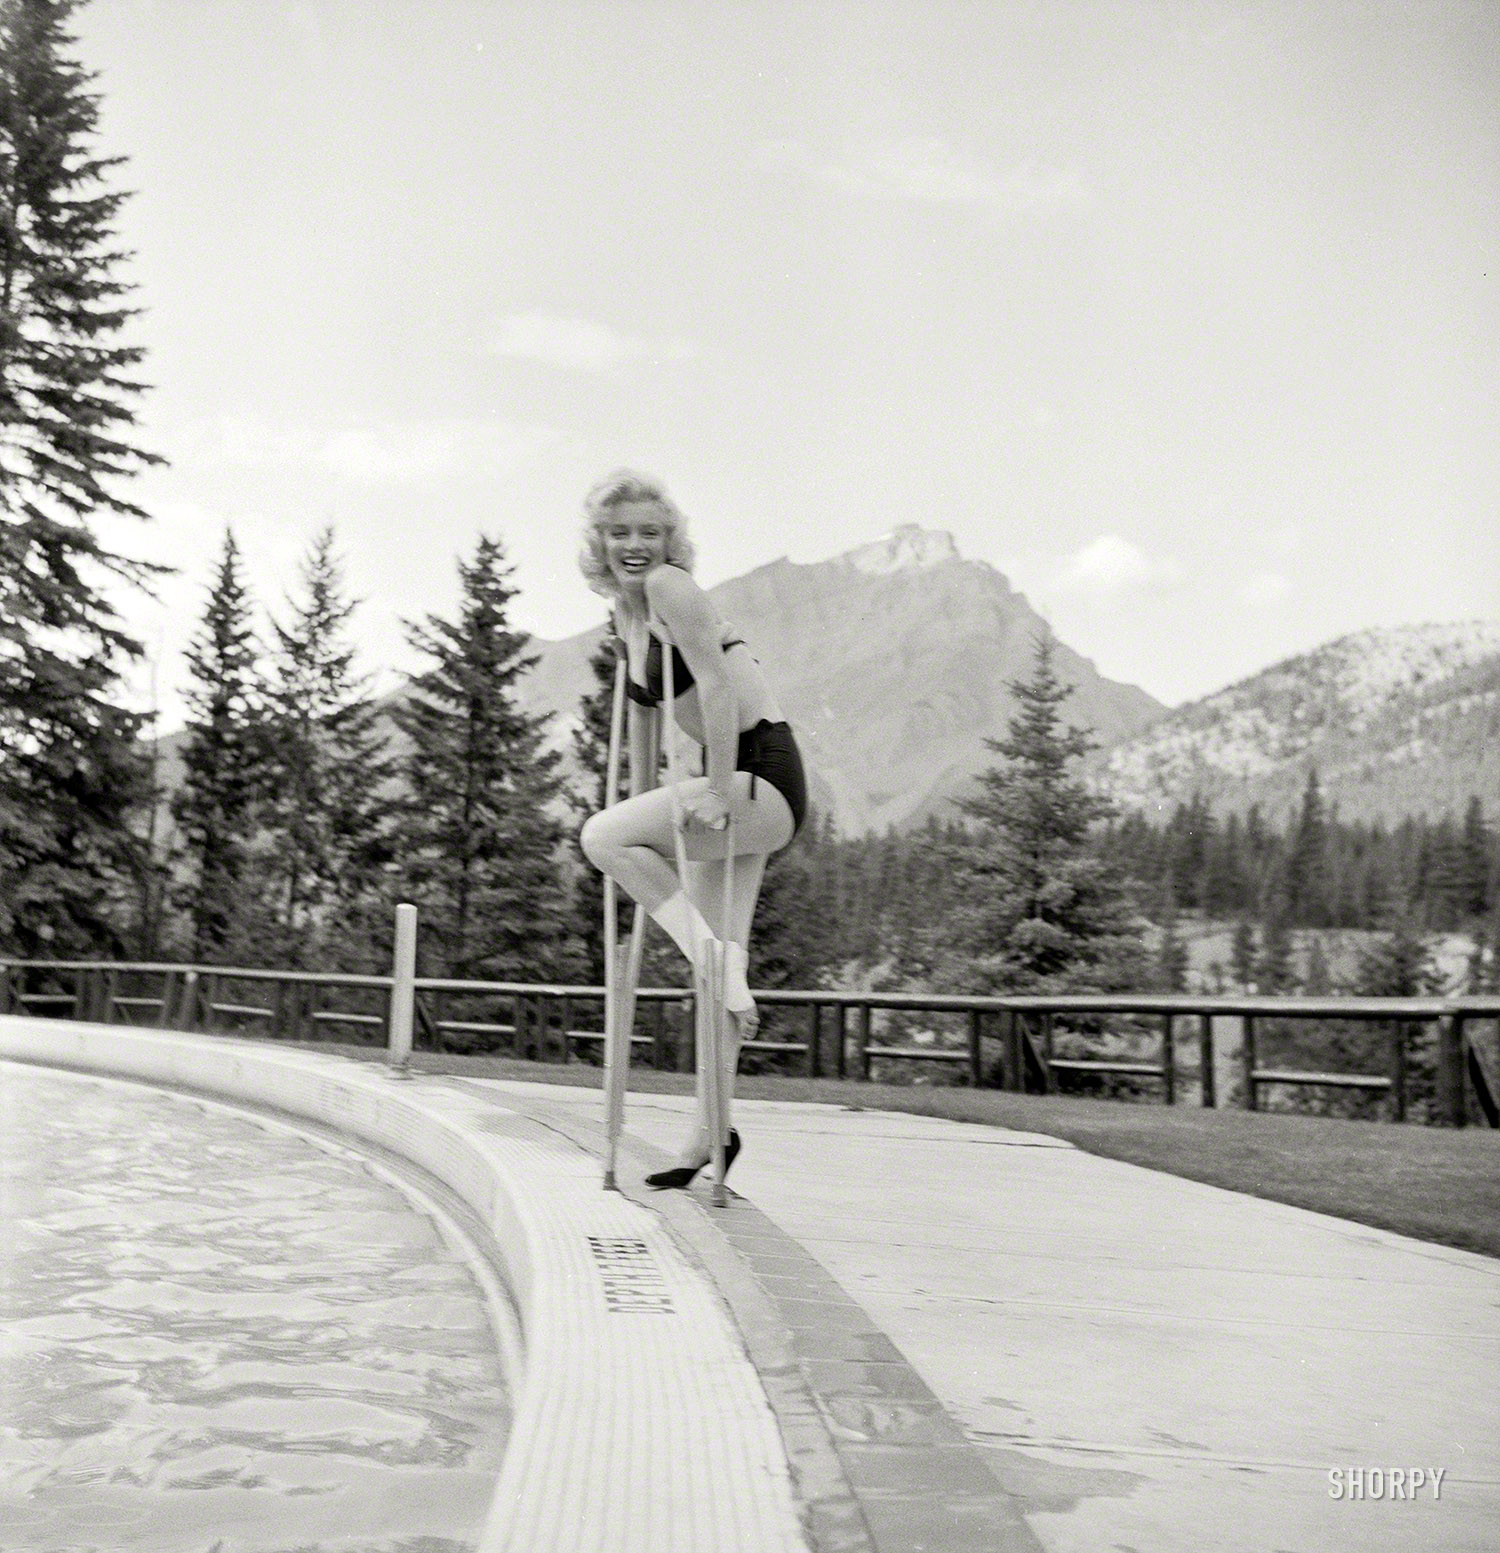 Marilyn Monroe in 1953 at the Banff Springs Hotel in Alberta, among those other majestic peaks known as the Canadian Rockies. She sprained her ankle filming River of No Return. Photo by John Vachon for Look magazine. View full size.